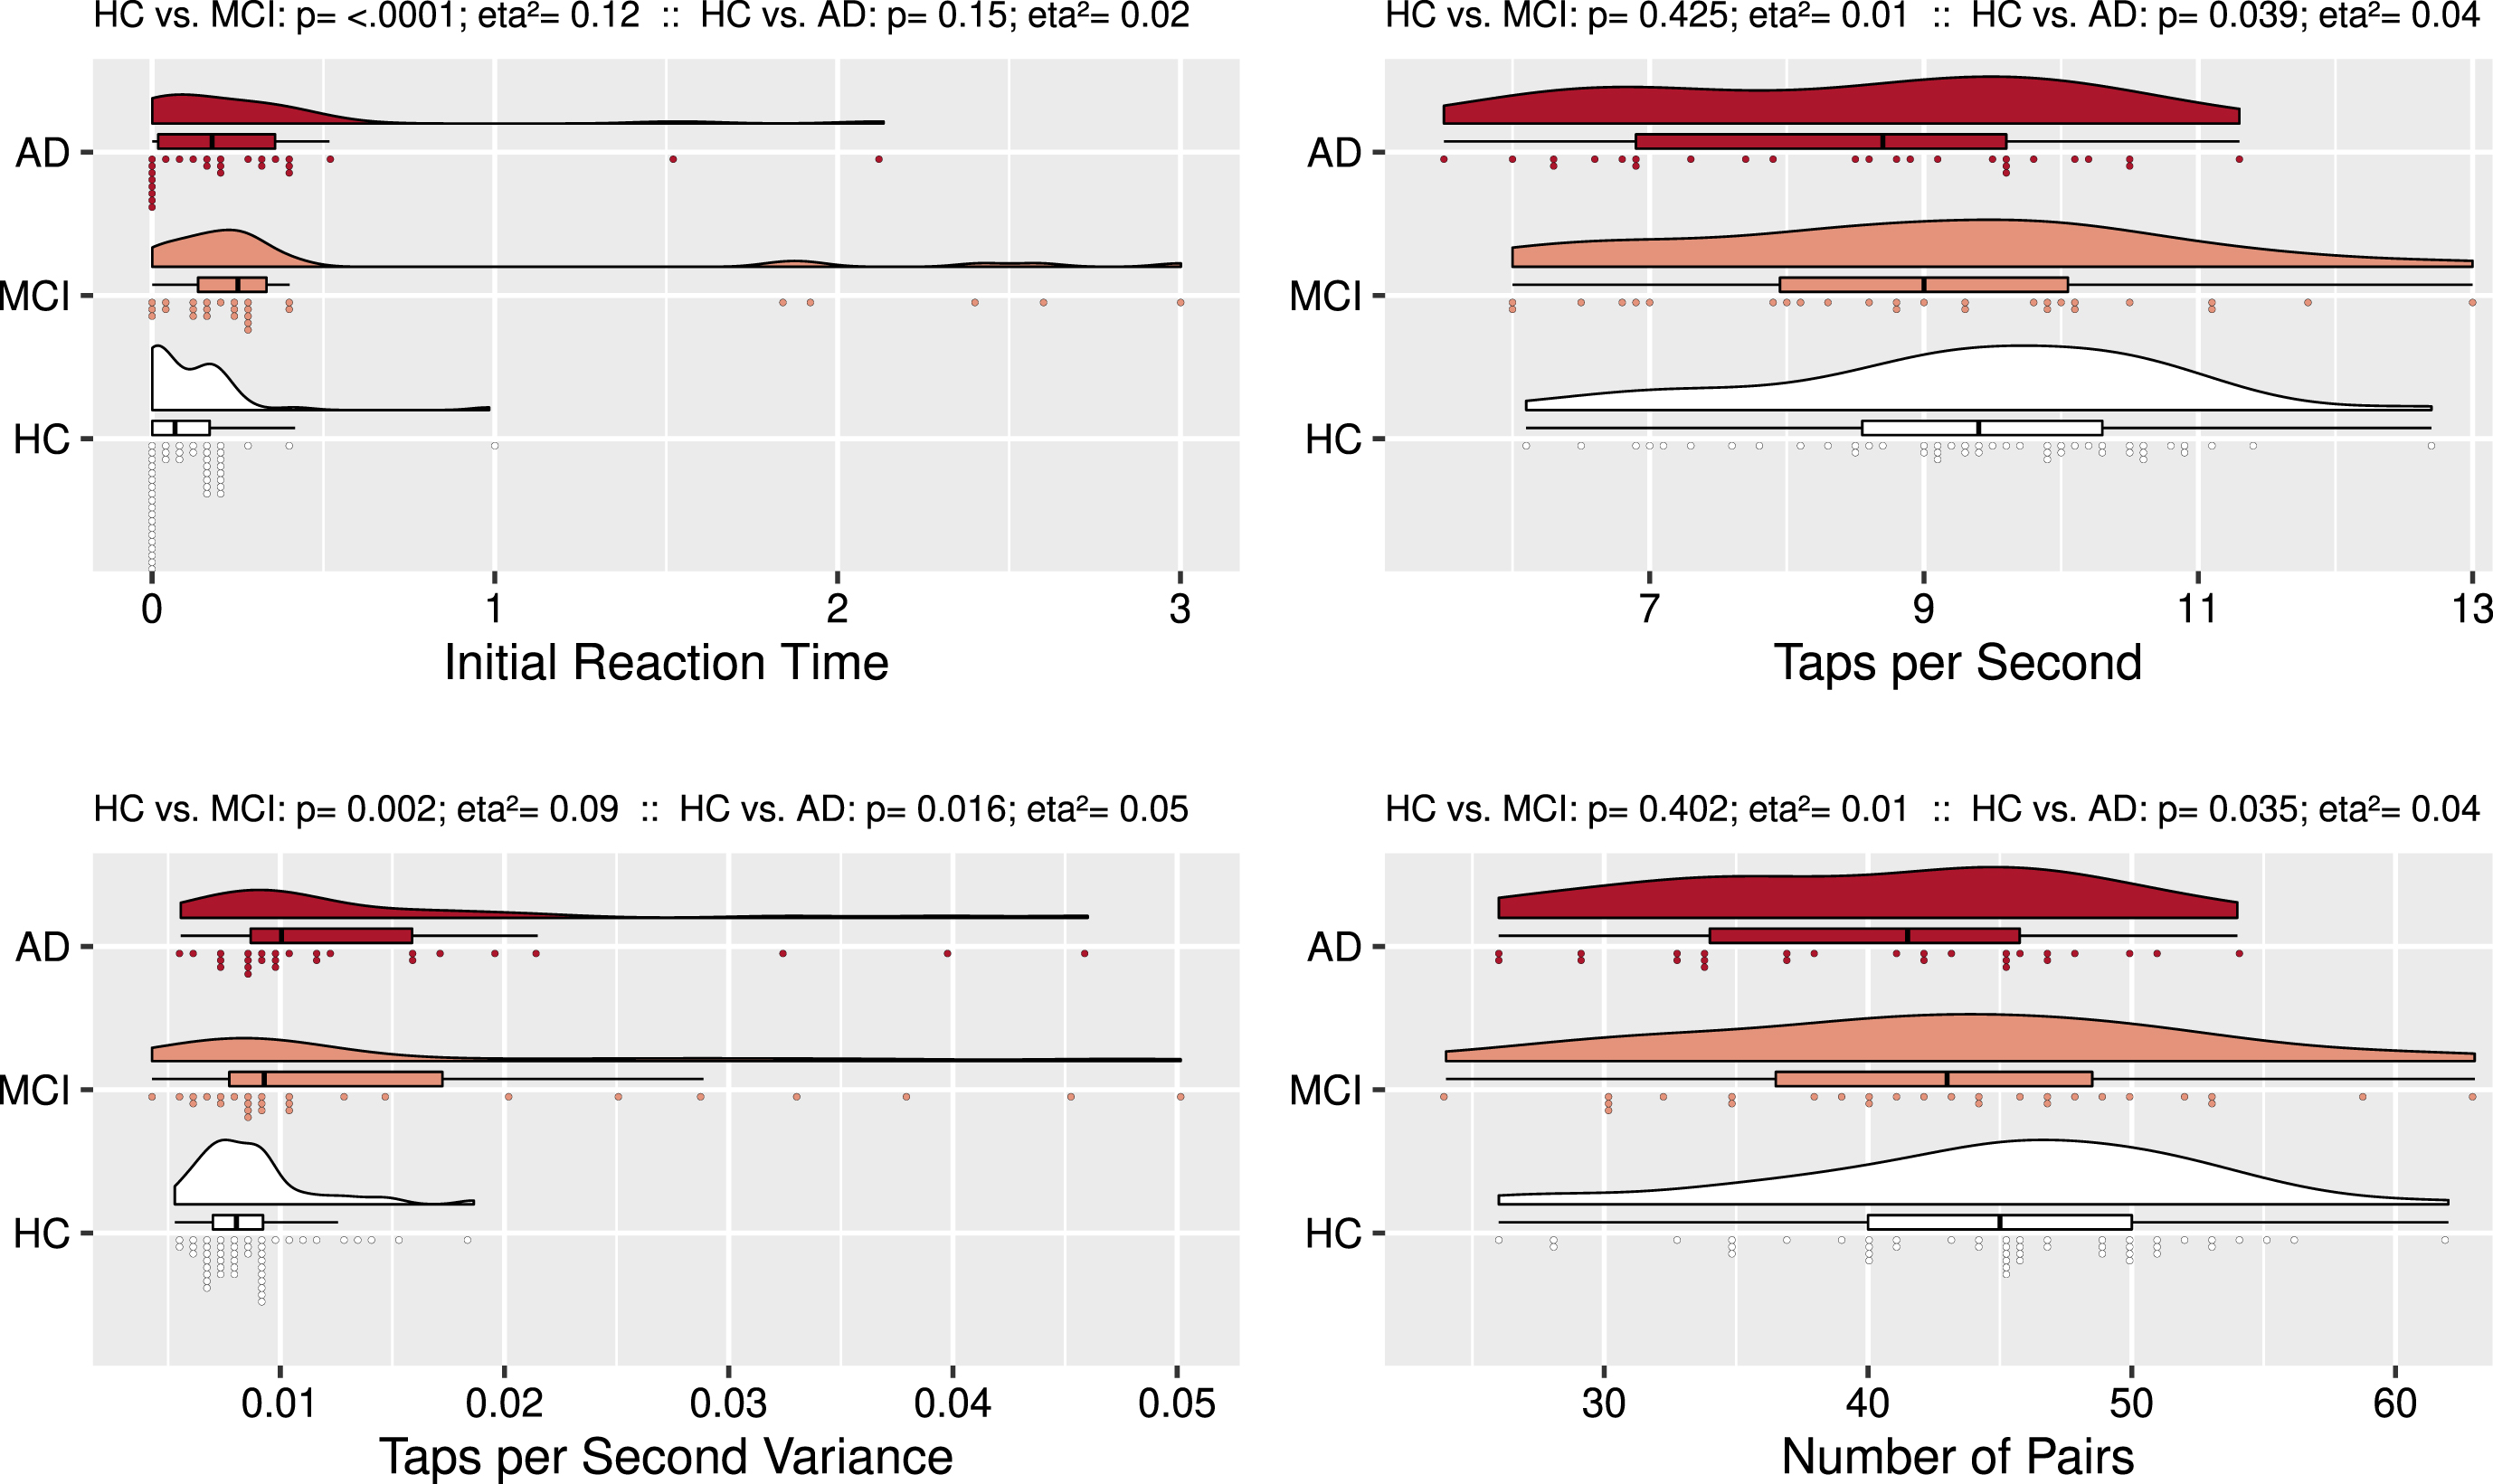 Synchronous Dual Finger Tapping: Group Comparisons. Rain cloud plots with density curves, boxplots, and individual subject scores divided over 75 bins. Compared to controls, amnestic MCI subjects had a longer Initial Reaction Time and larger Taps per Second Variance. Compared to controls, AD subjects had fewer Taps per Second, larger Taps per Second Variance, and fewer Number of Pairs.